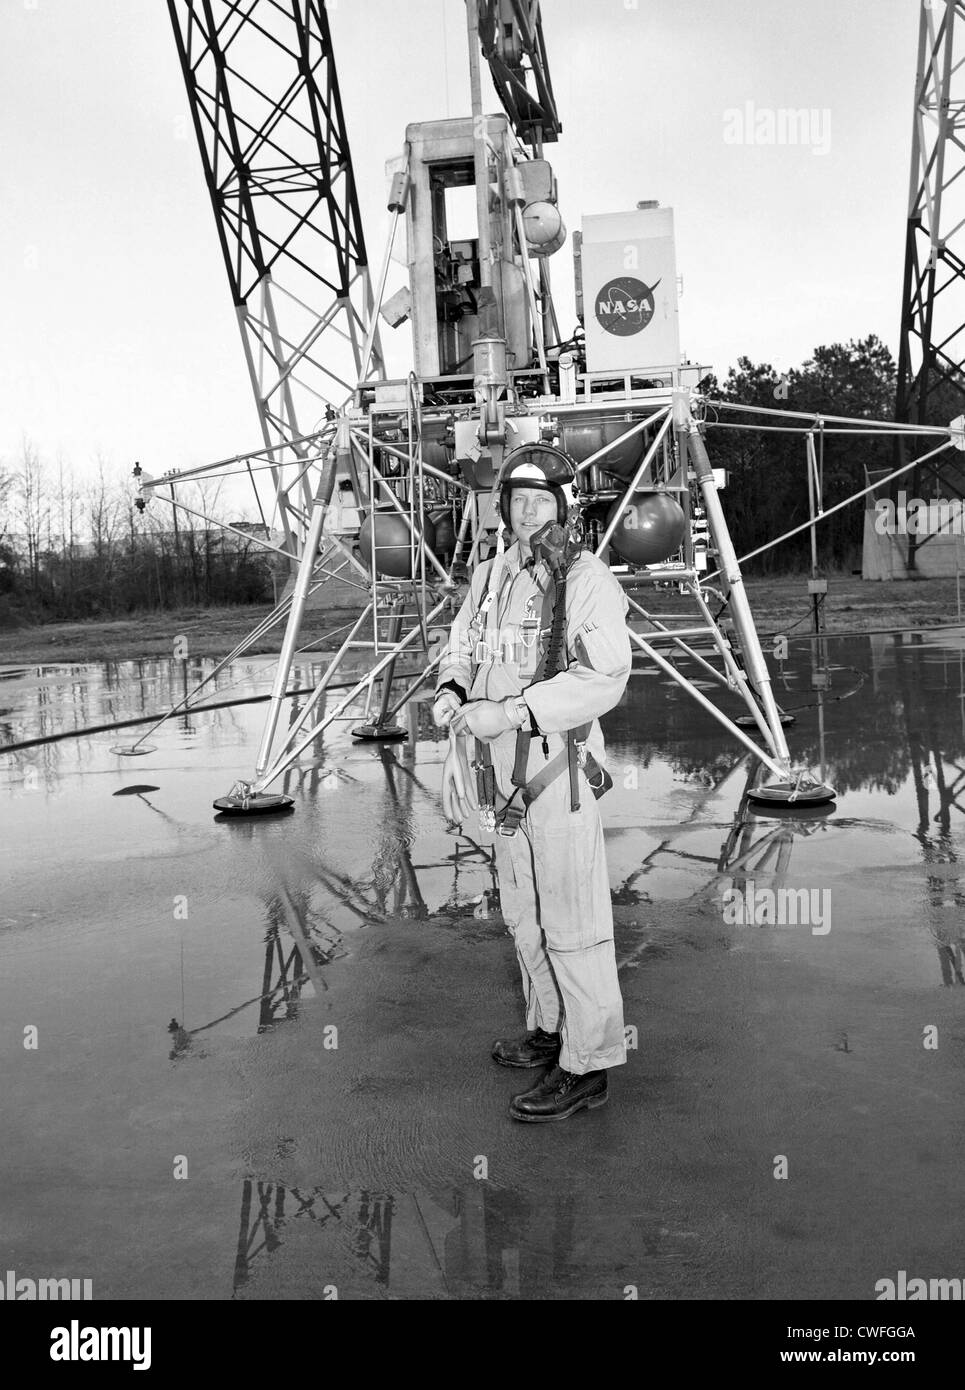 NASA Astronaut Neil Armstrong training for the historic Apollo 11 mission at the Lunar Landing Research Facility February 12, 1969 Hampton, Virginia. Stock Photo